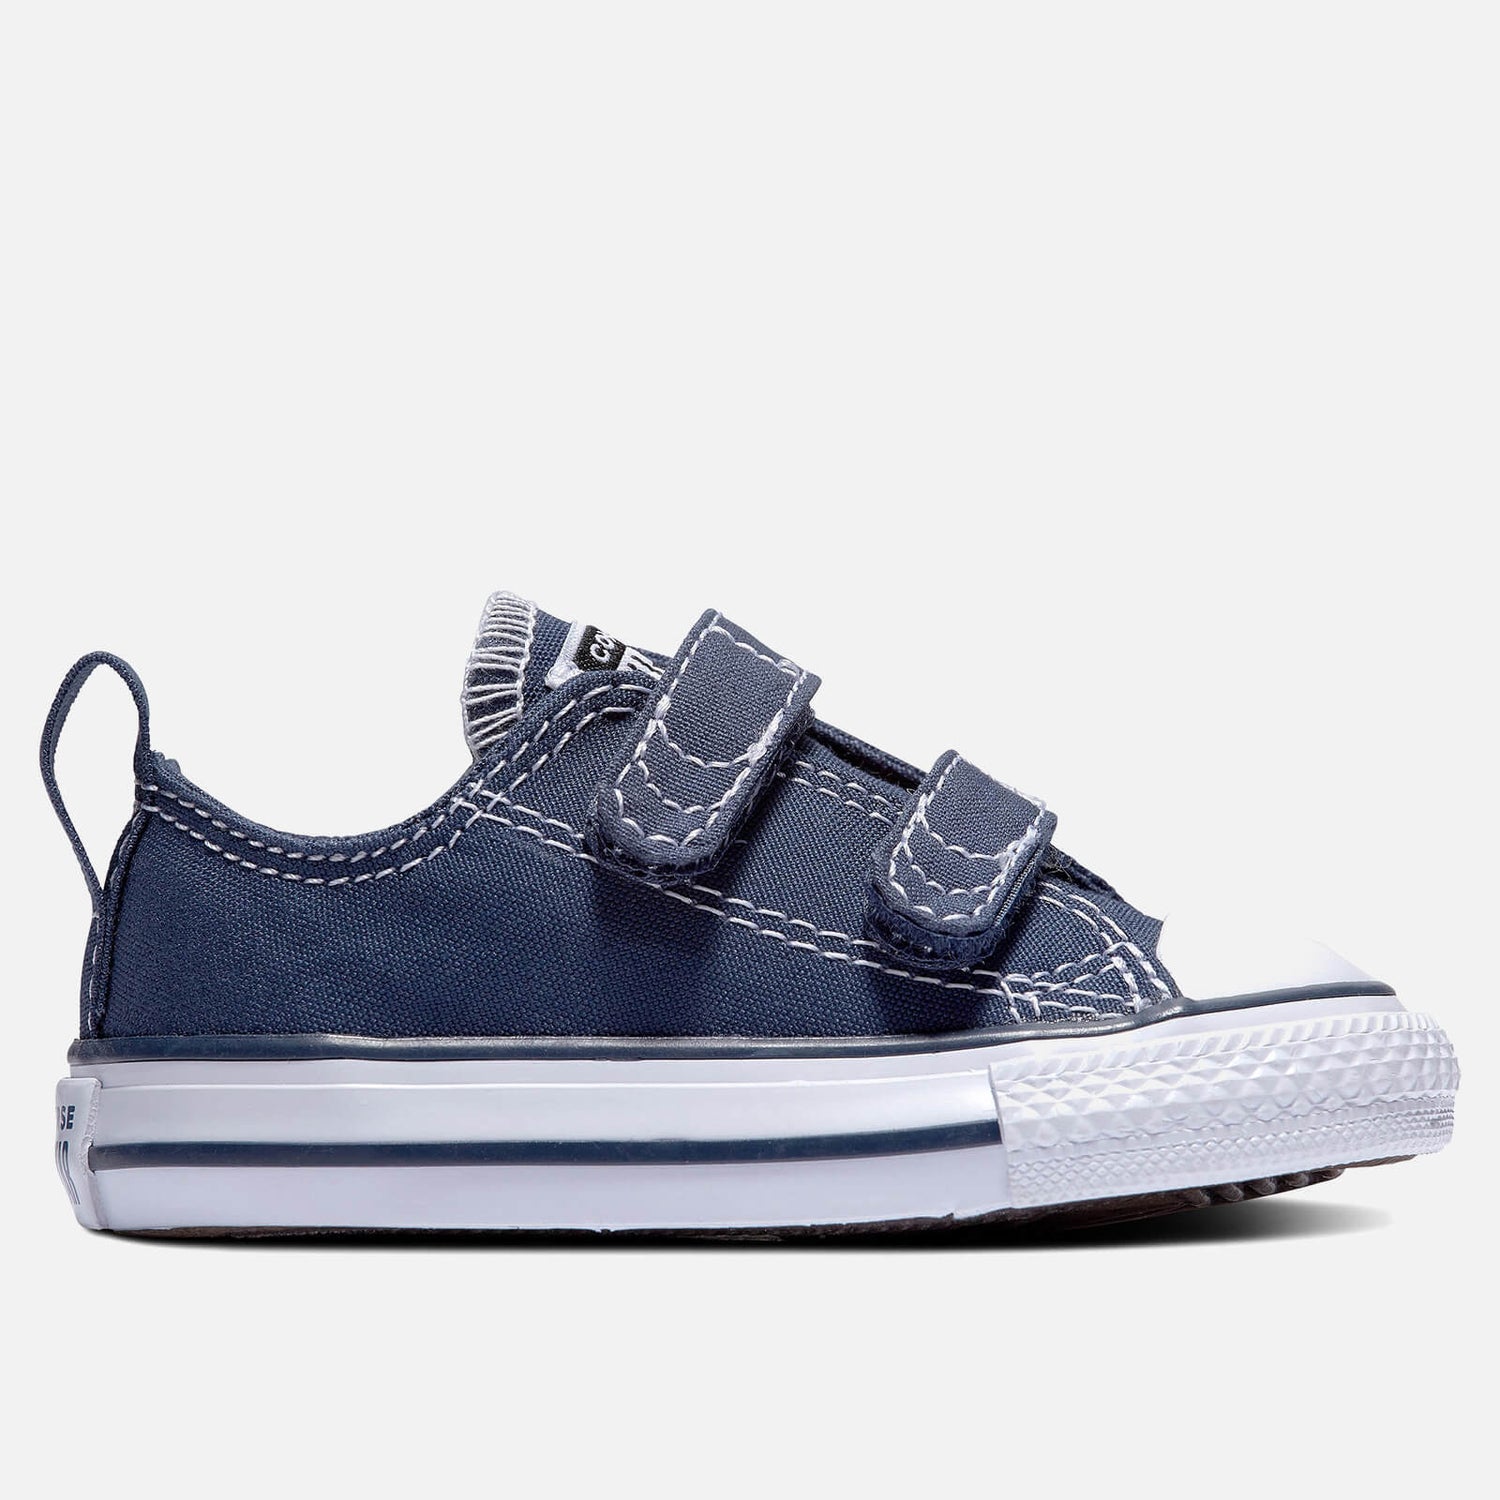 Converse Toddlers' Chuck Taylor All Star Ox Velcro Trainers - Blue - UK 4 Baby